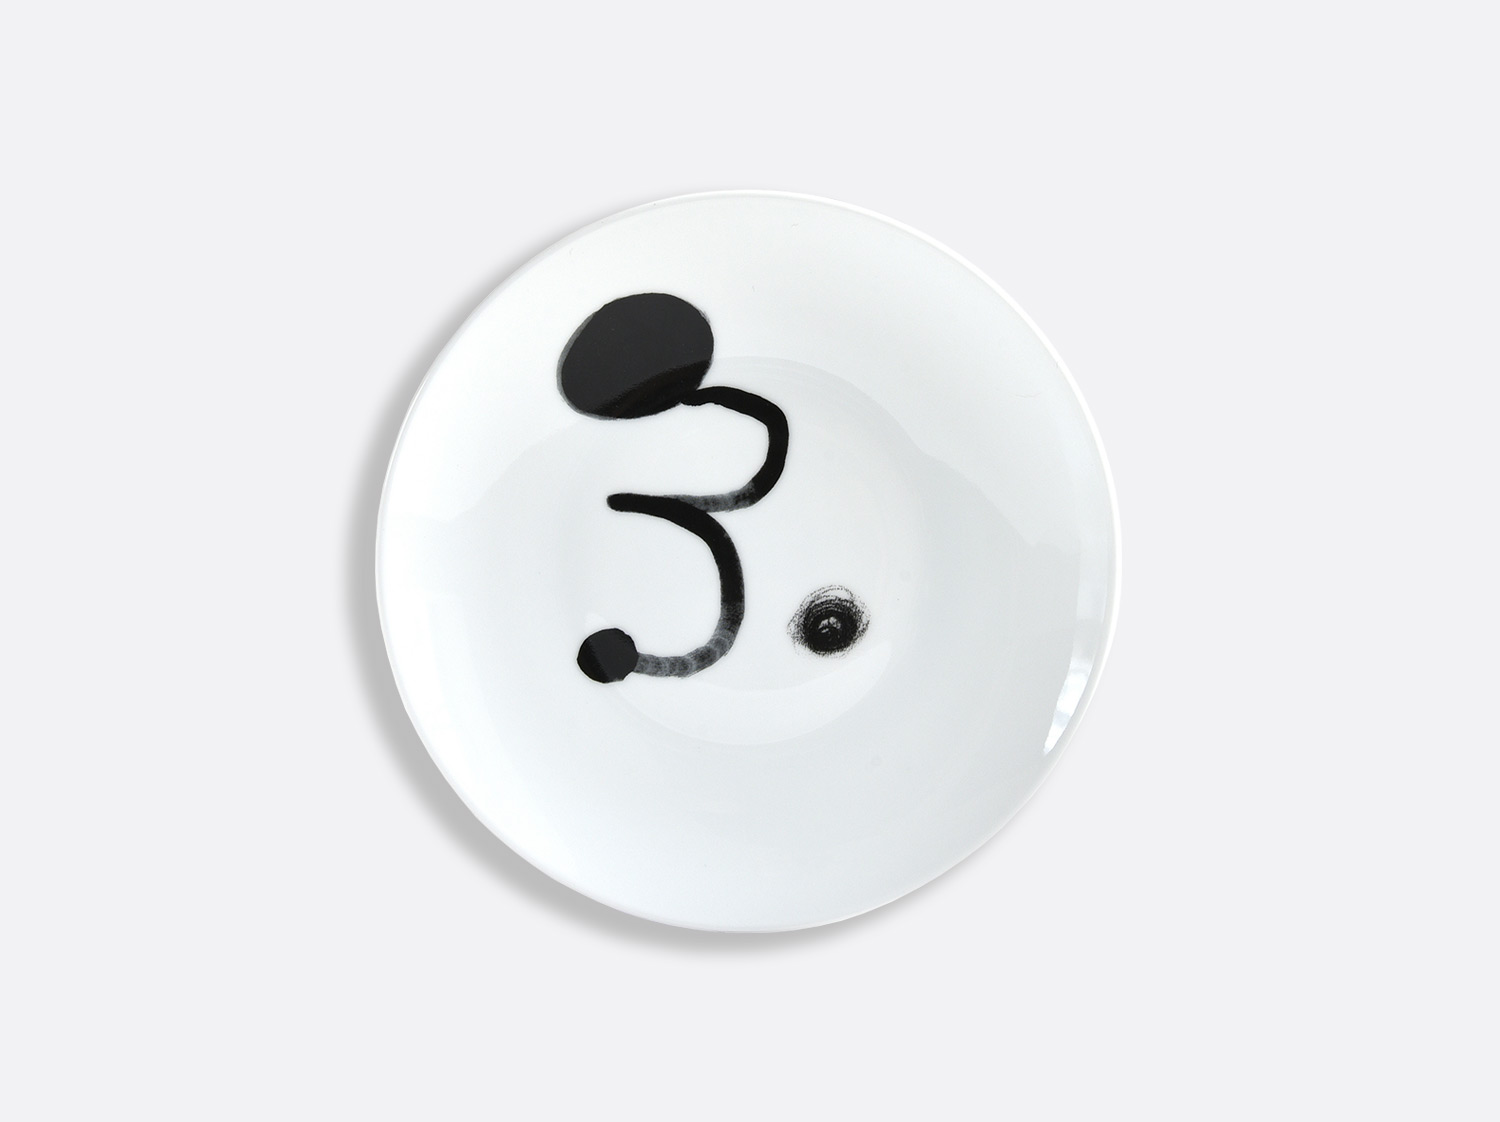 China 2 Bread and butter plates 6.5" Noir - Page 52 of the collection PARLER SEUL - Joan Miro | Bernardaud